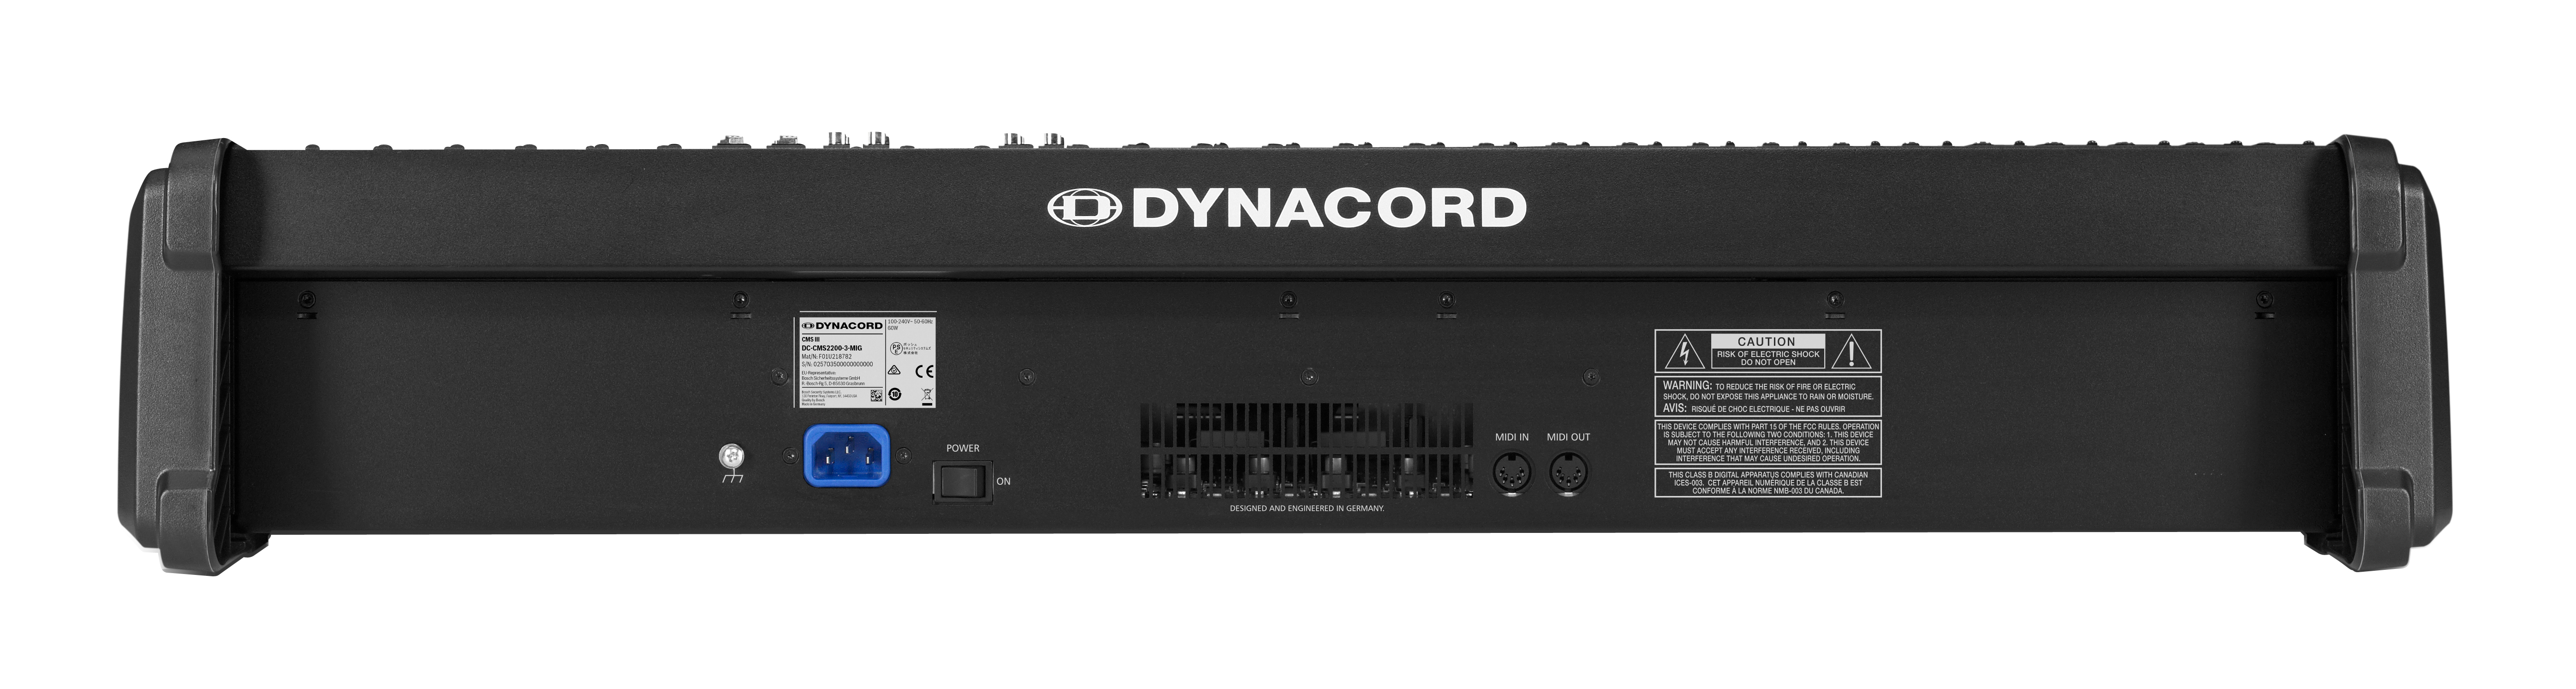 dynacord audio interface driver